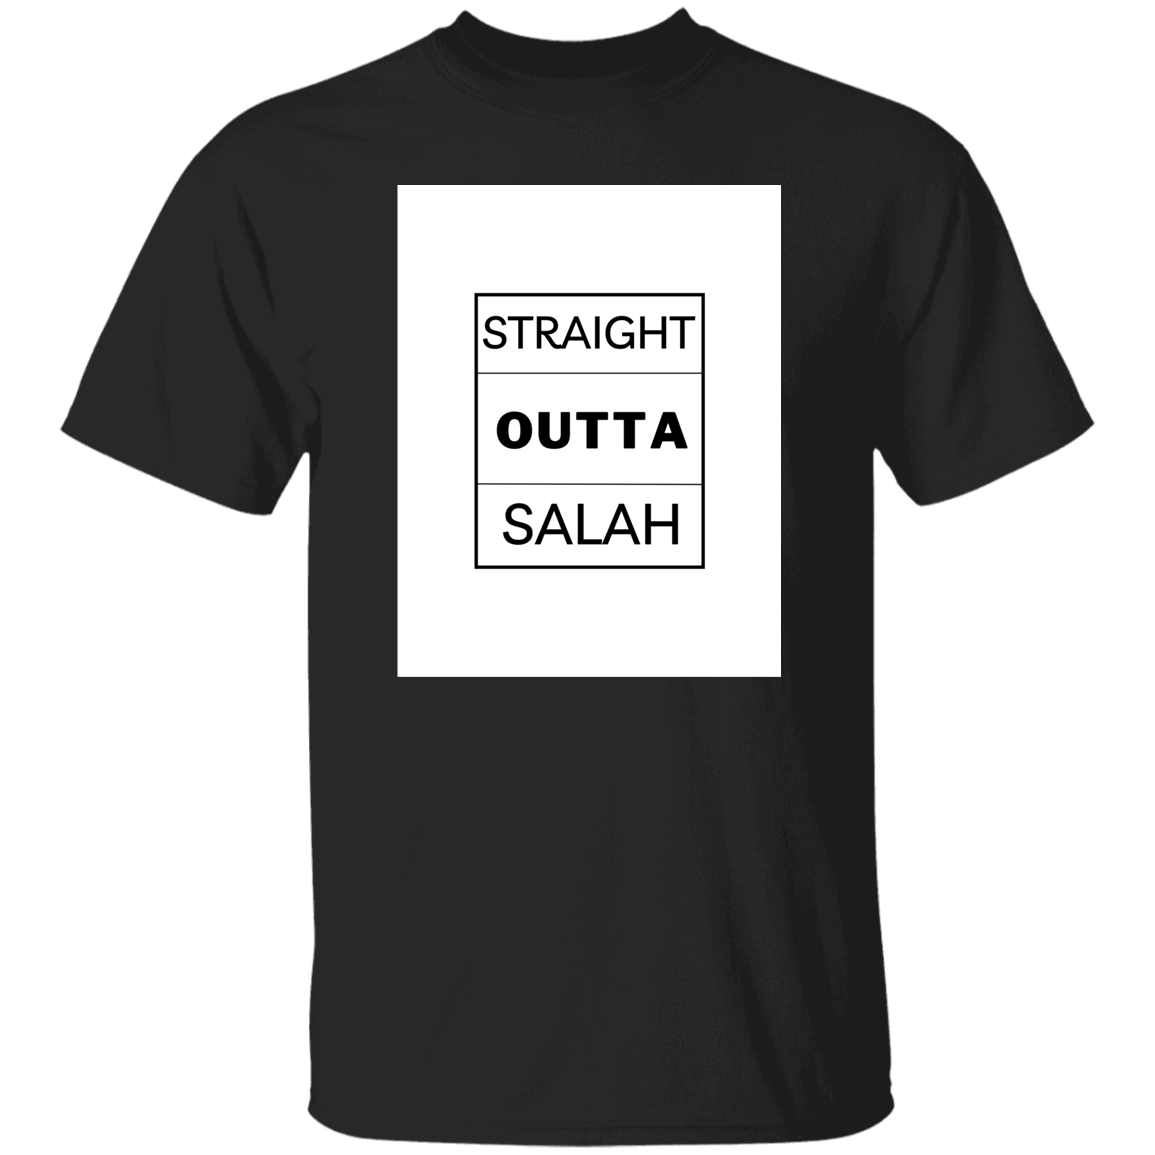 STRAIGHT OUTTA SALAH  T-Shirt (MORE COLOR OPTIONS)